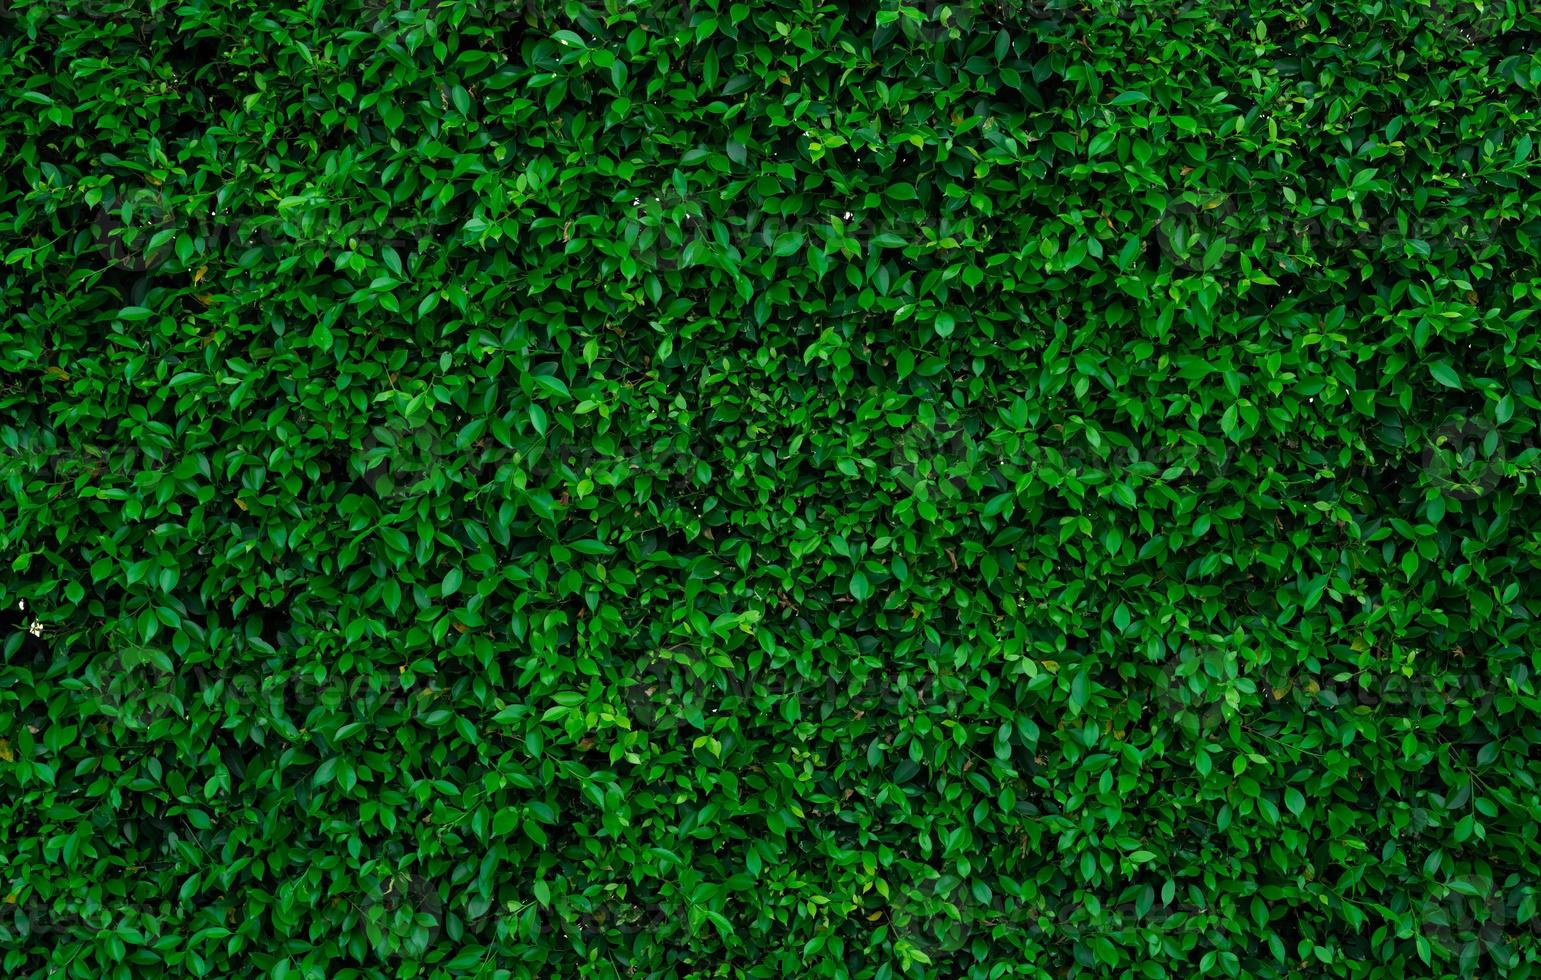 Small green leaves in hedge wall texture background. Closeup green hedge plant in garden. Eco evergreen hedge wall. Natural backdrop. Beauty in nature. Green leaves with natural pattern wallpaper. photo